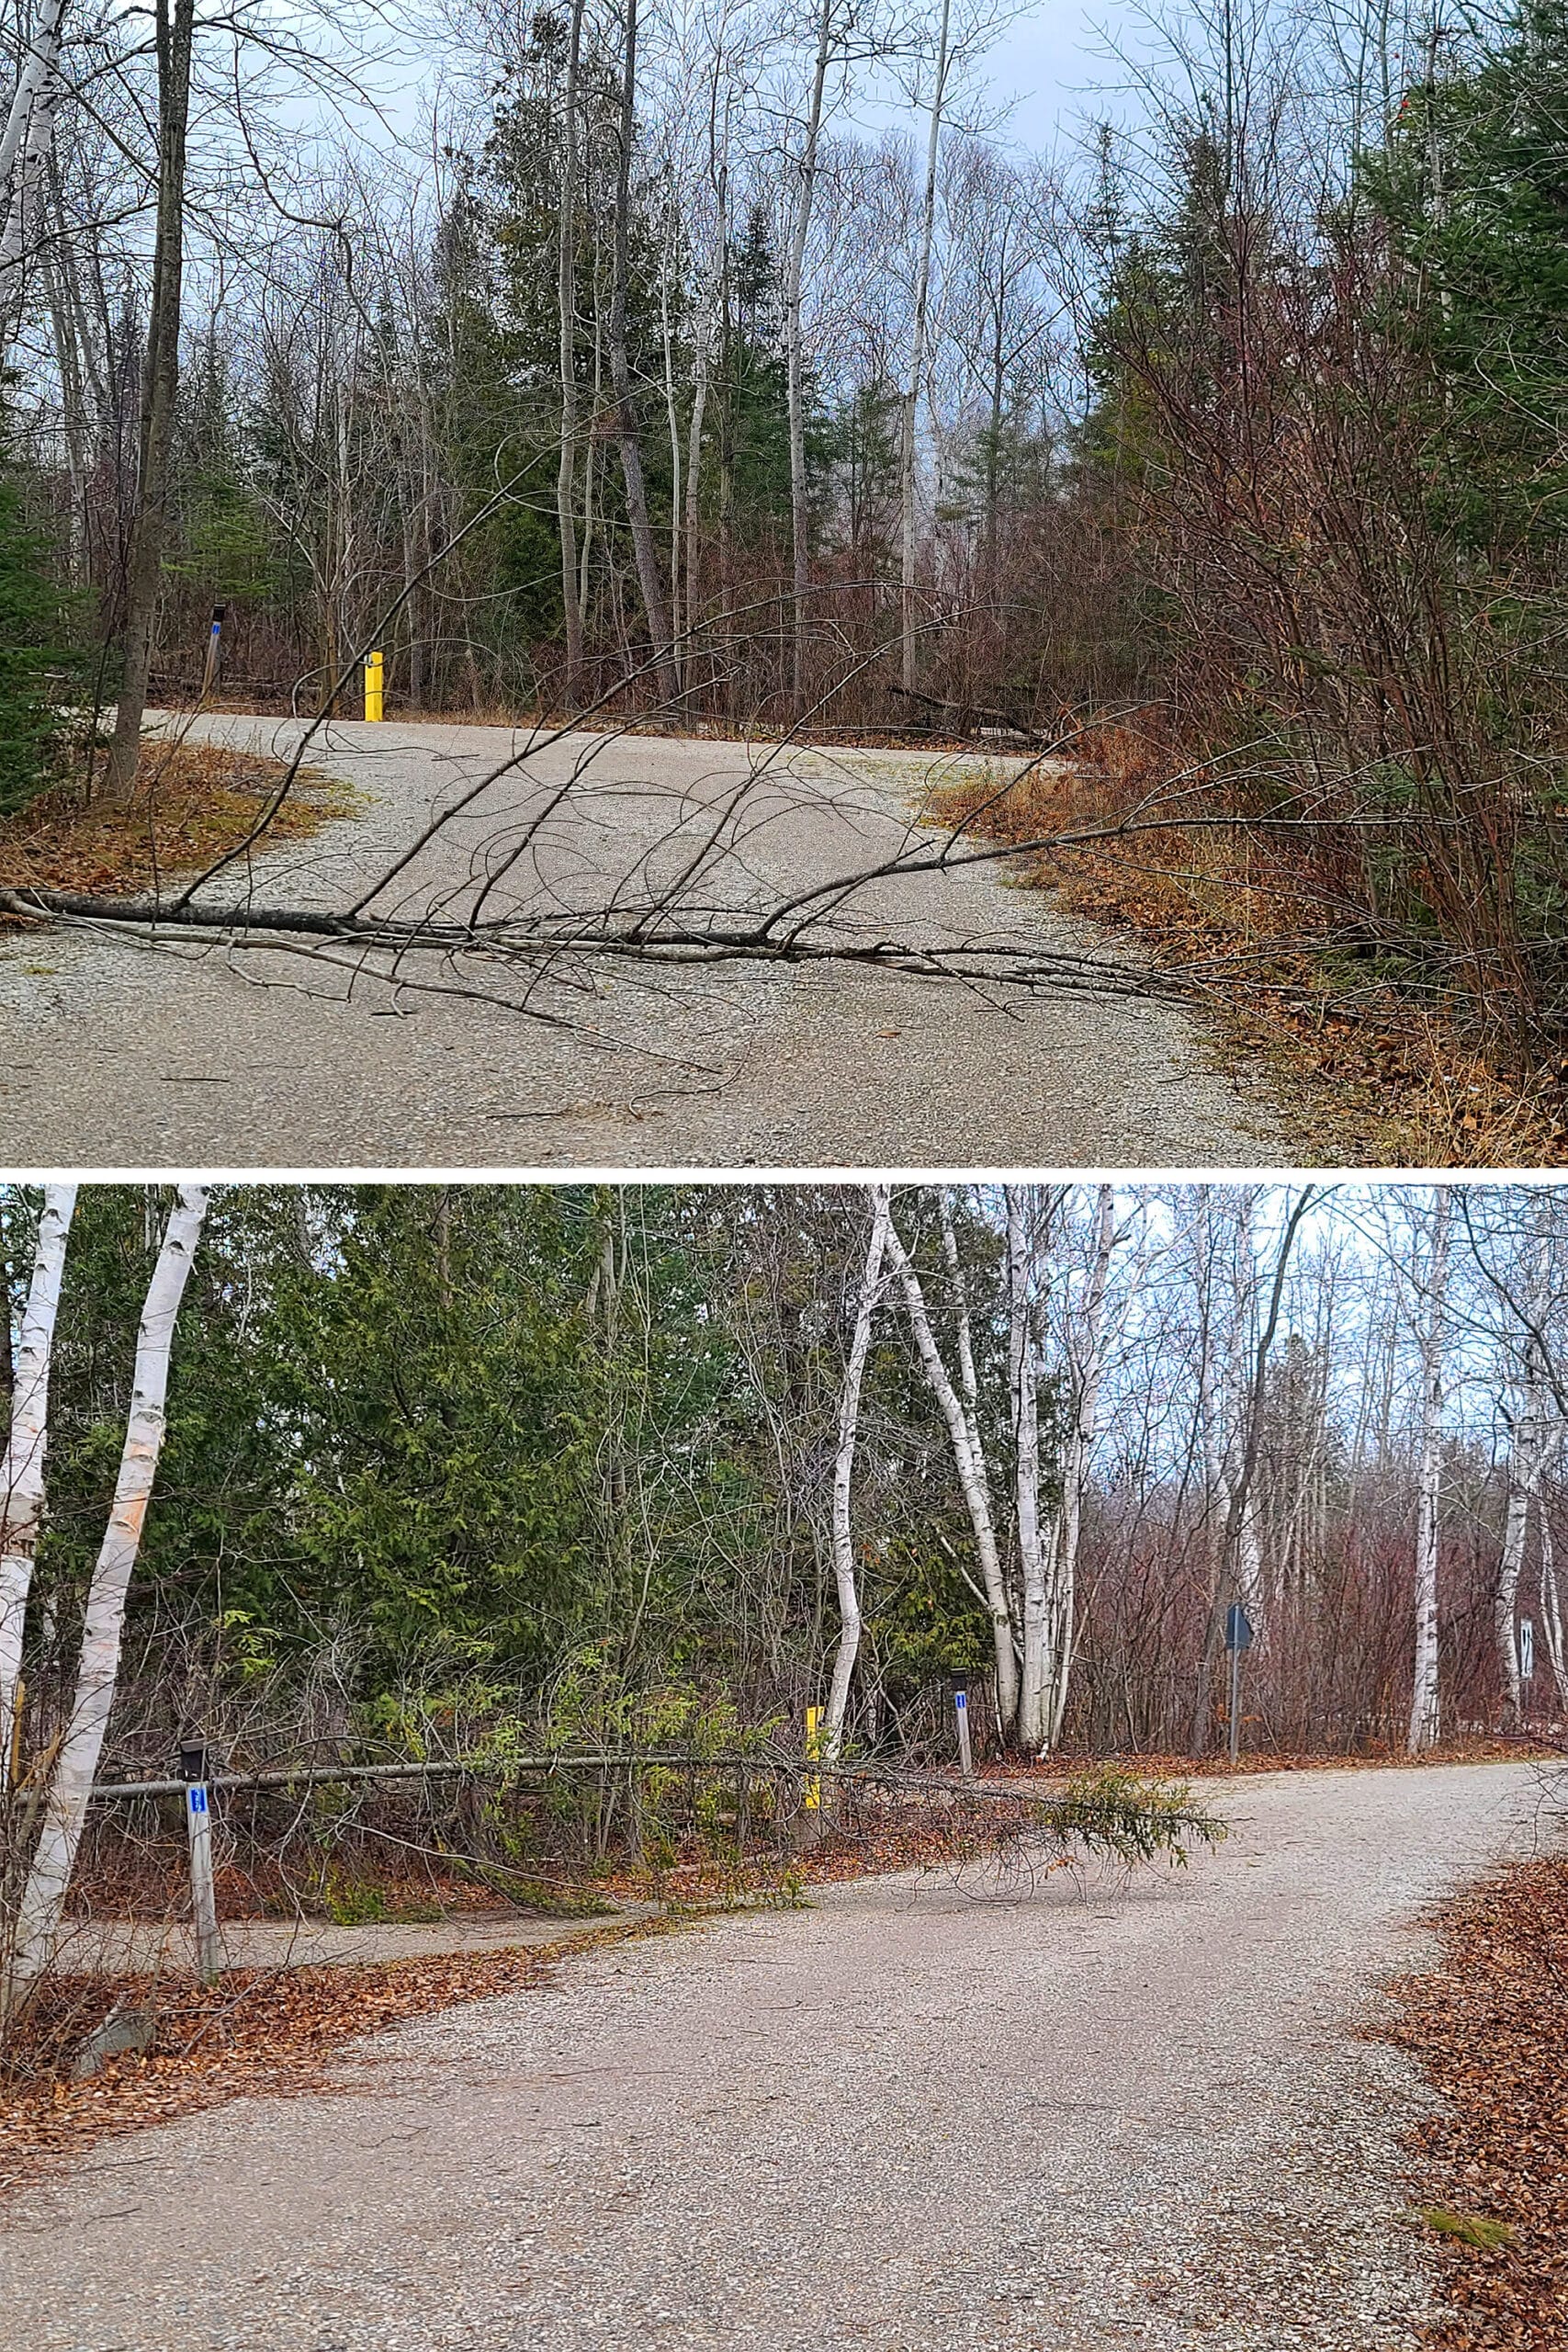 2 part image showing trees in the road.